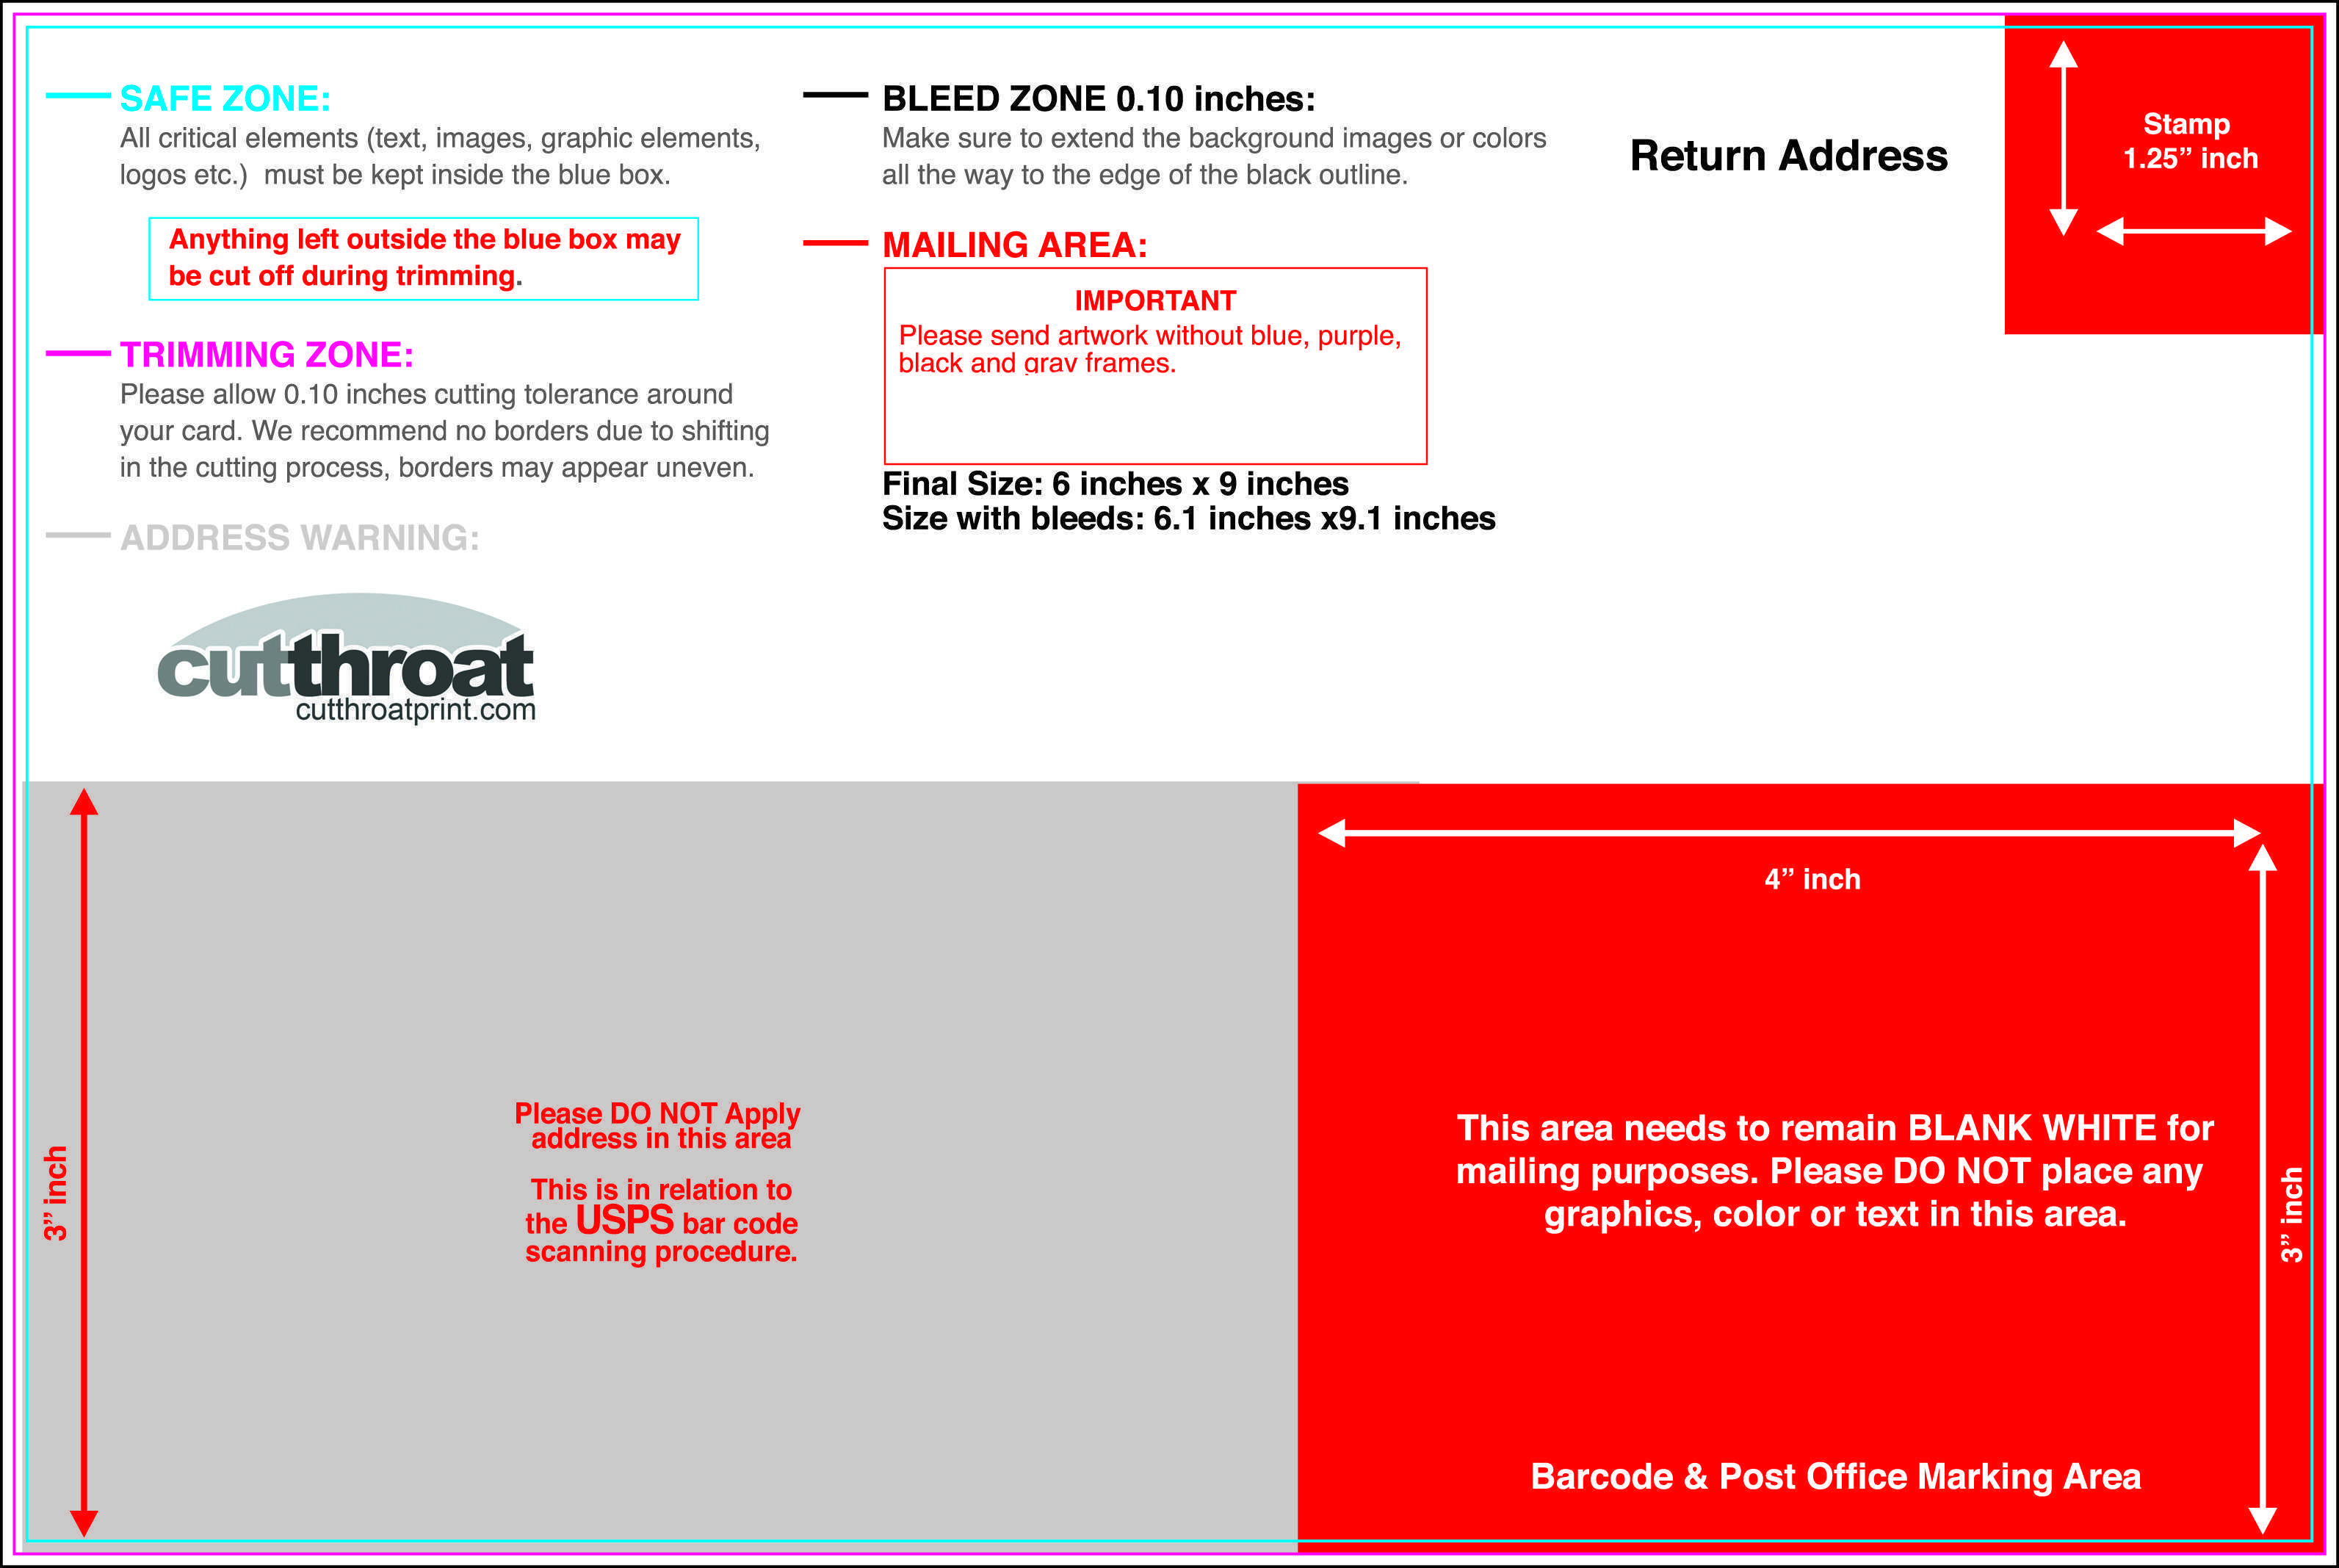 Usps Postcard Guidelines Template